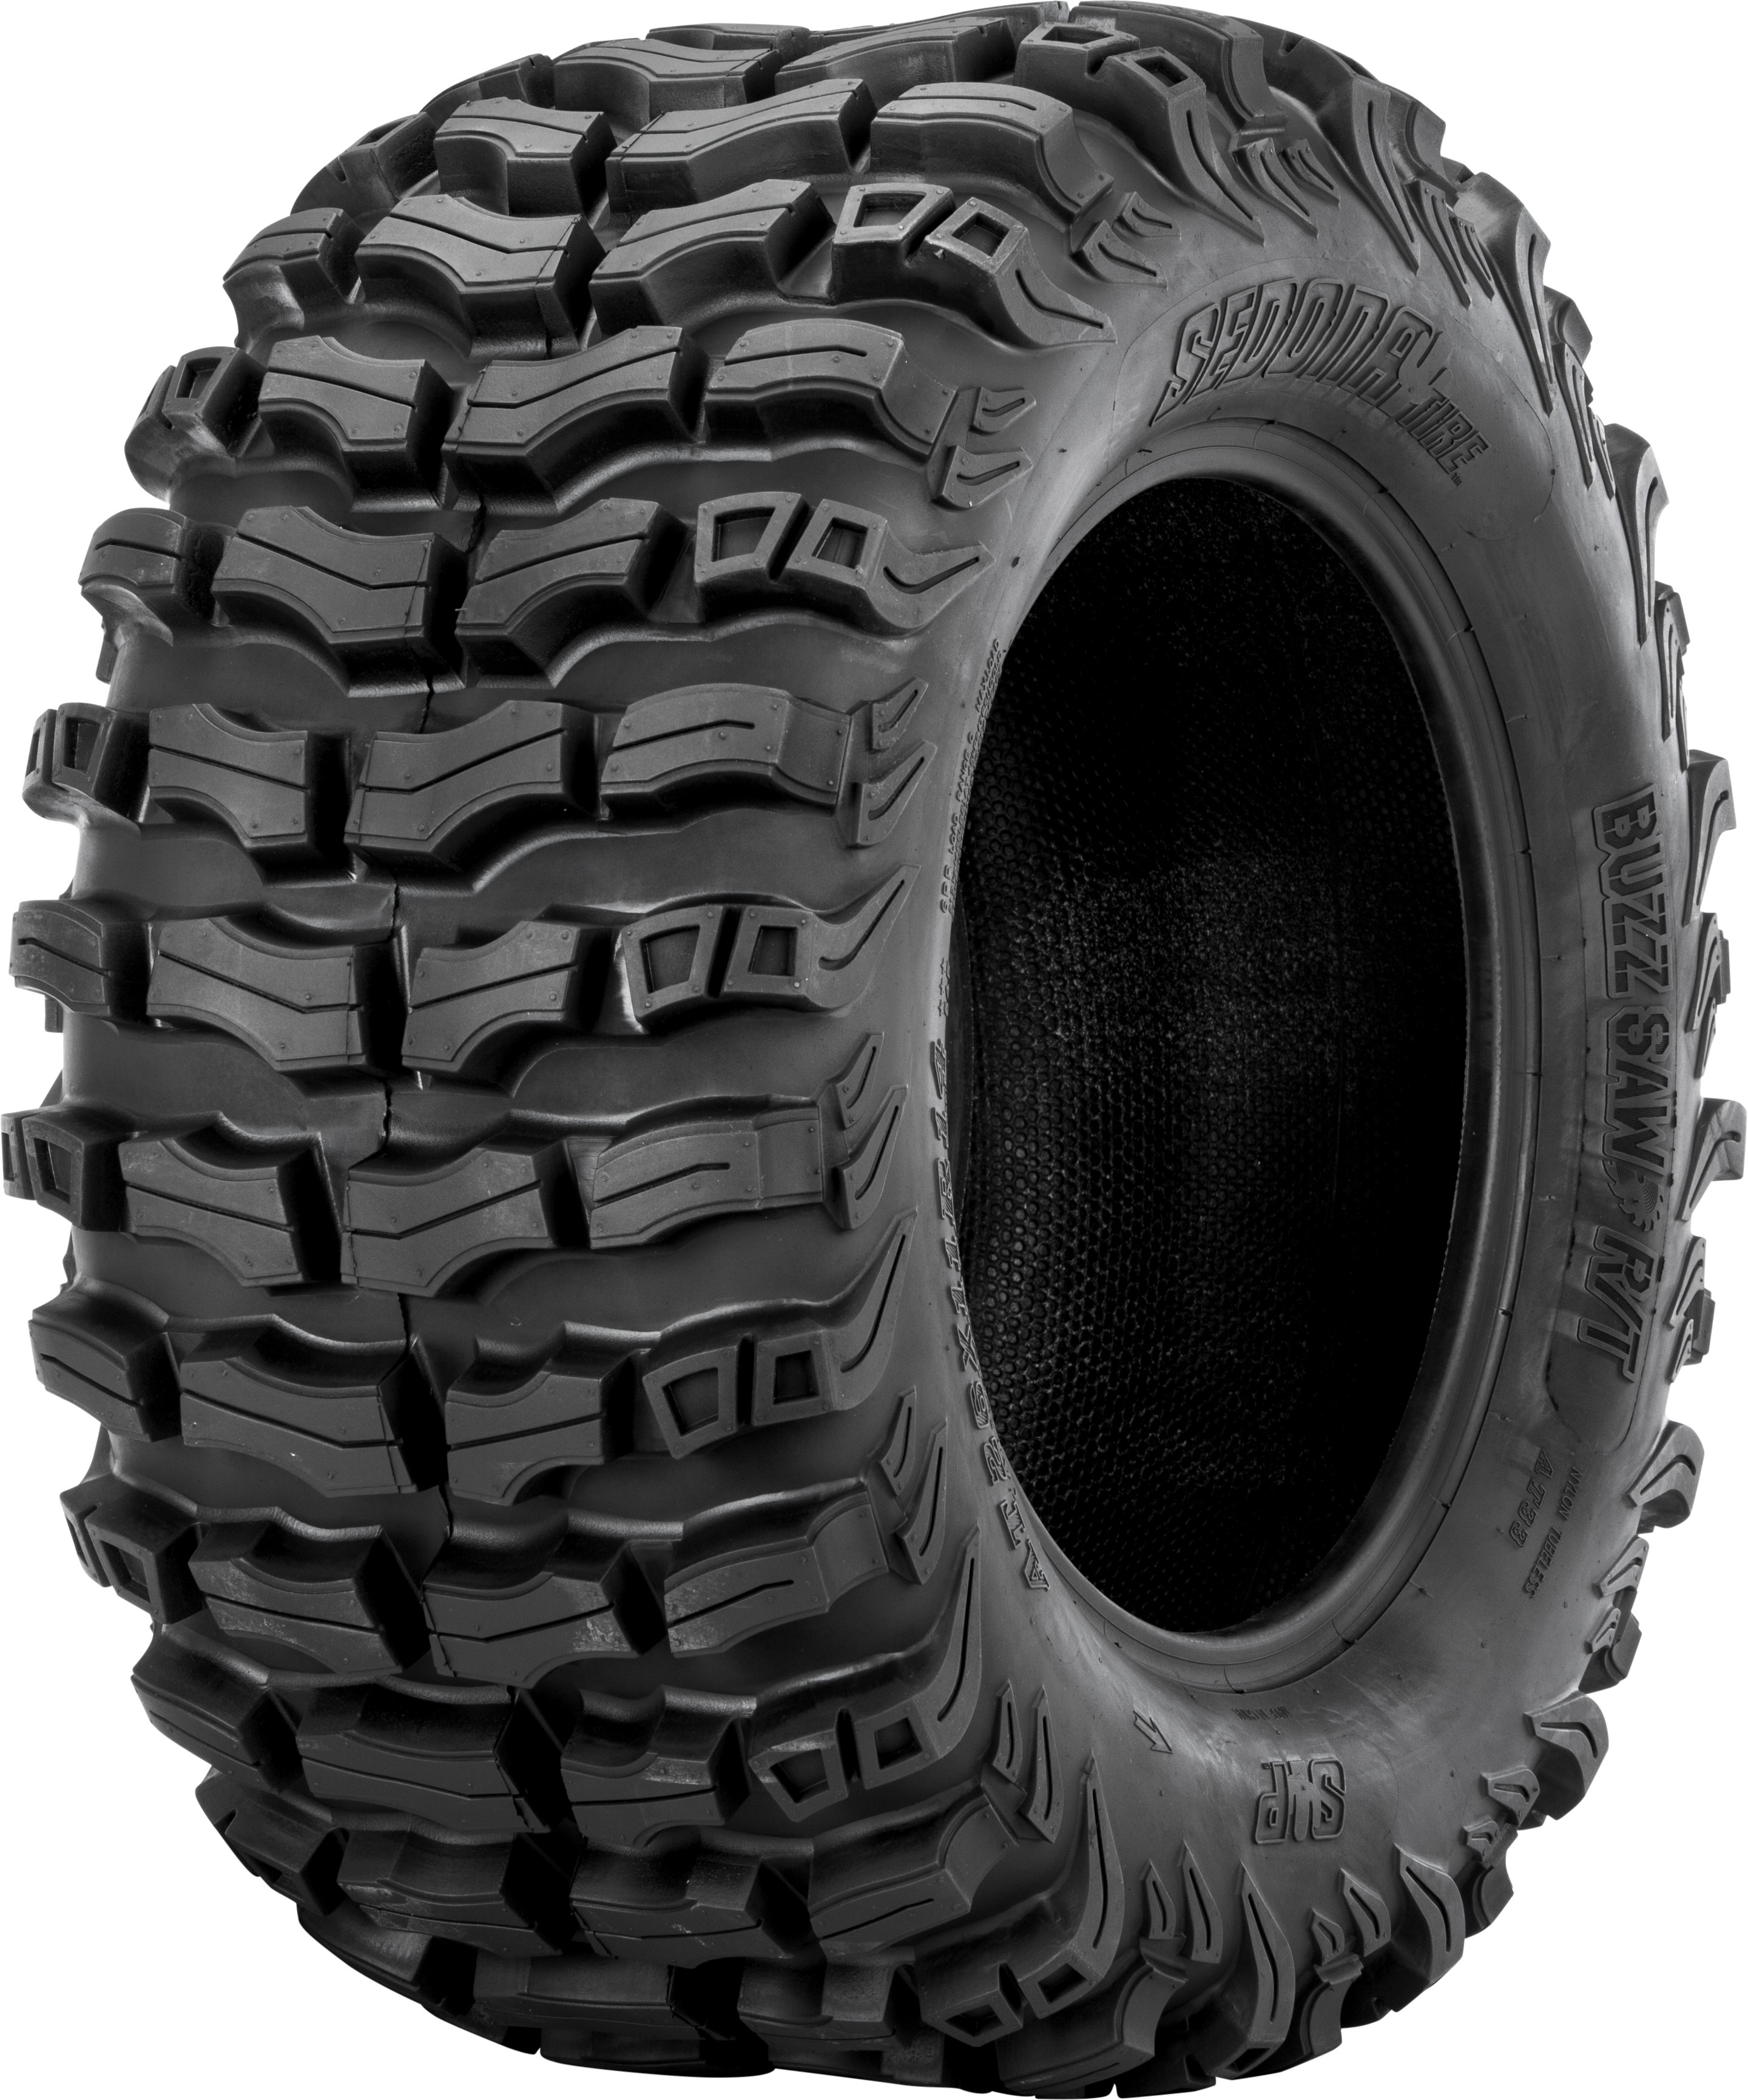 27X11Rx14 Buzz Saw R/T Tire - Click Image to Close